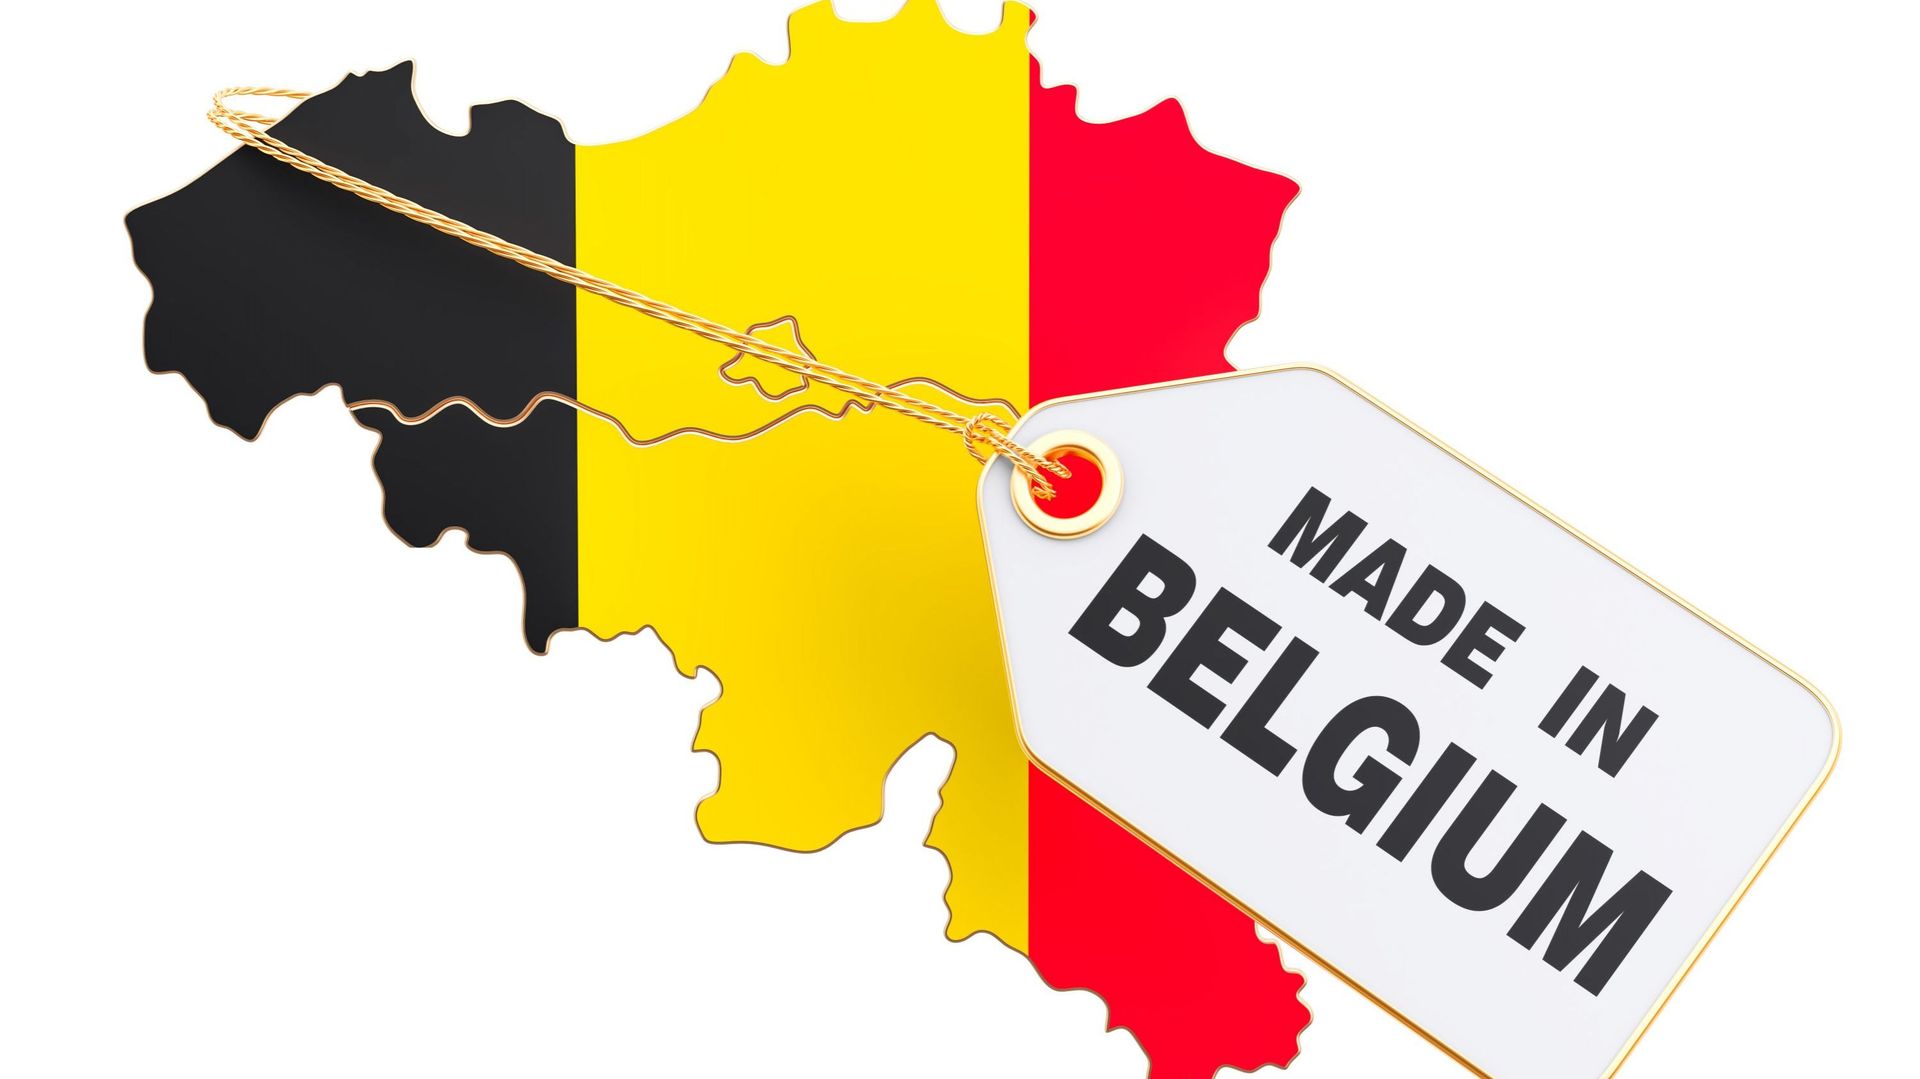 Made in Belgium concept, 3D rendering isolated on white background